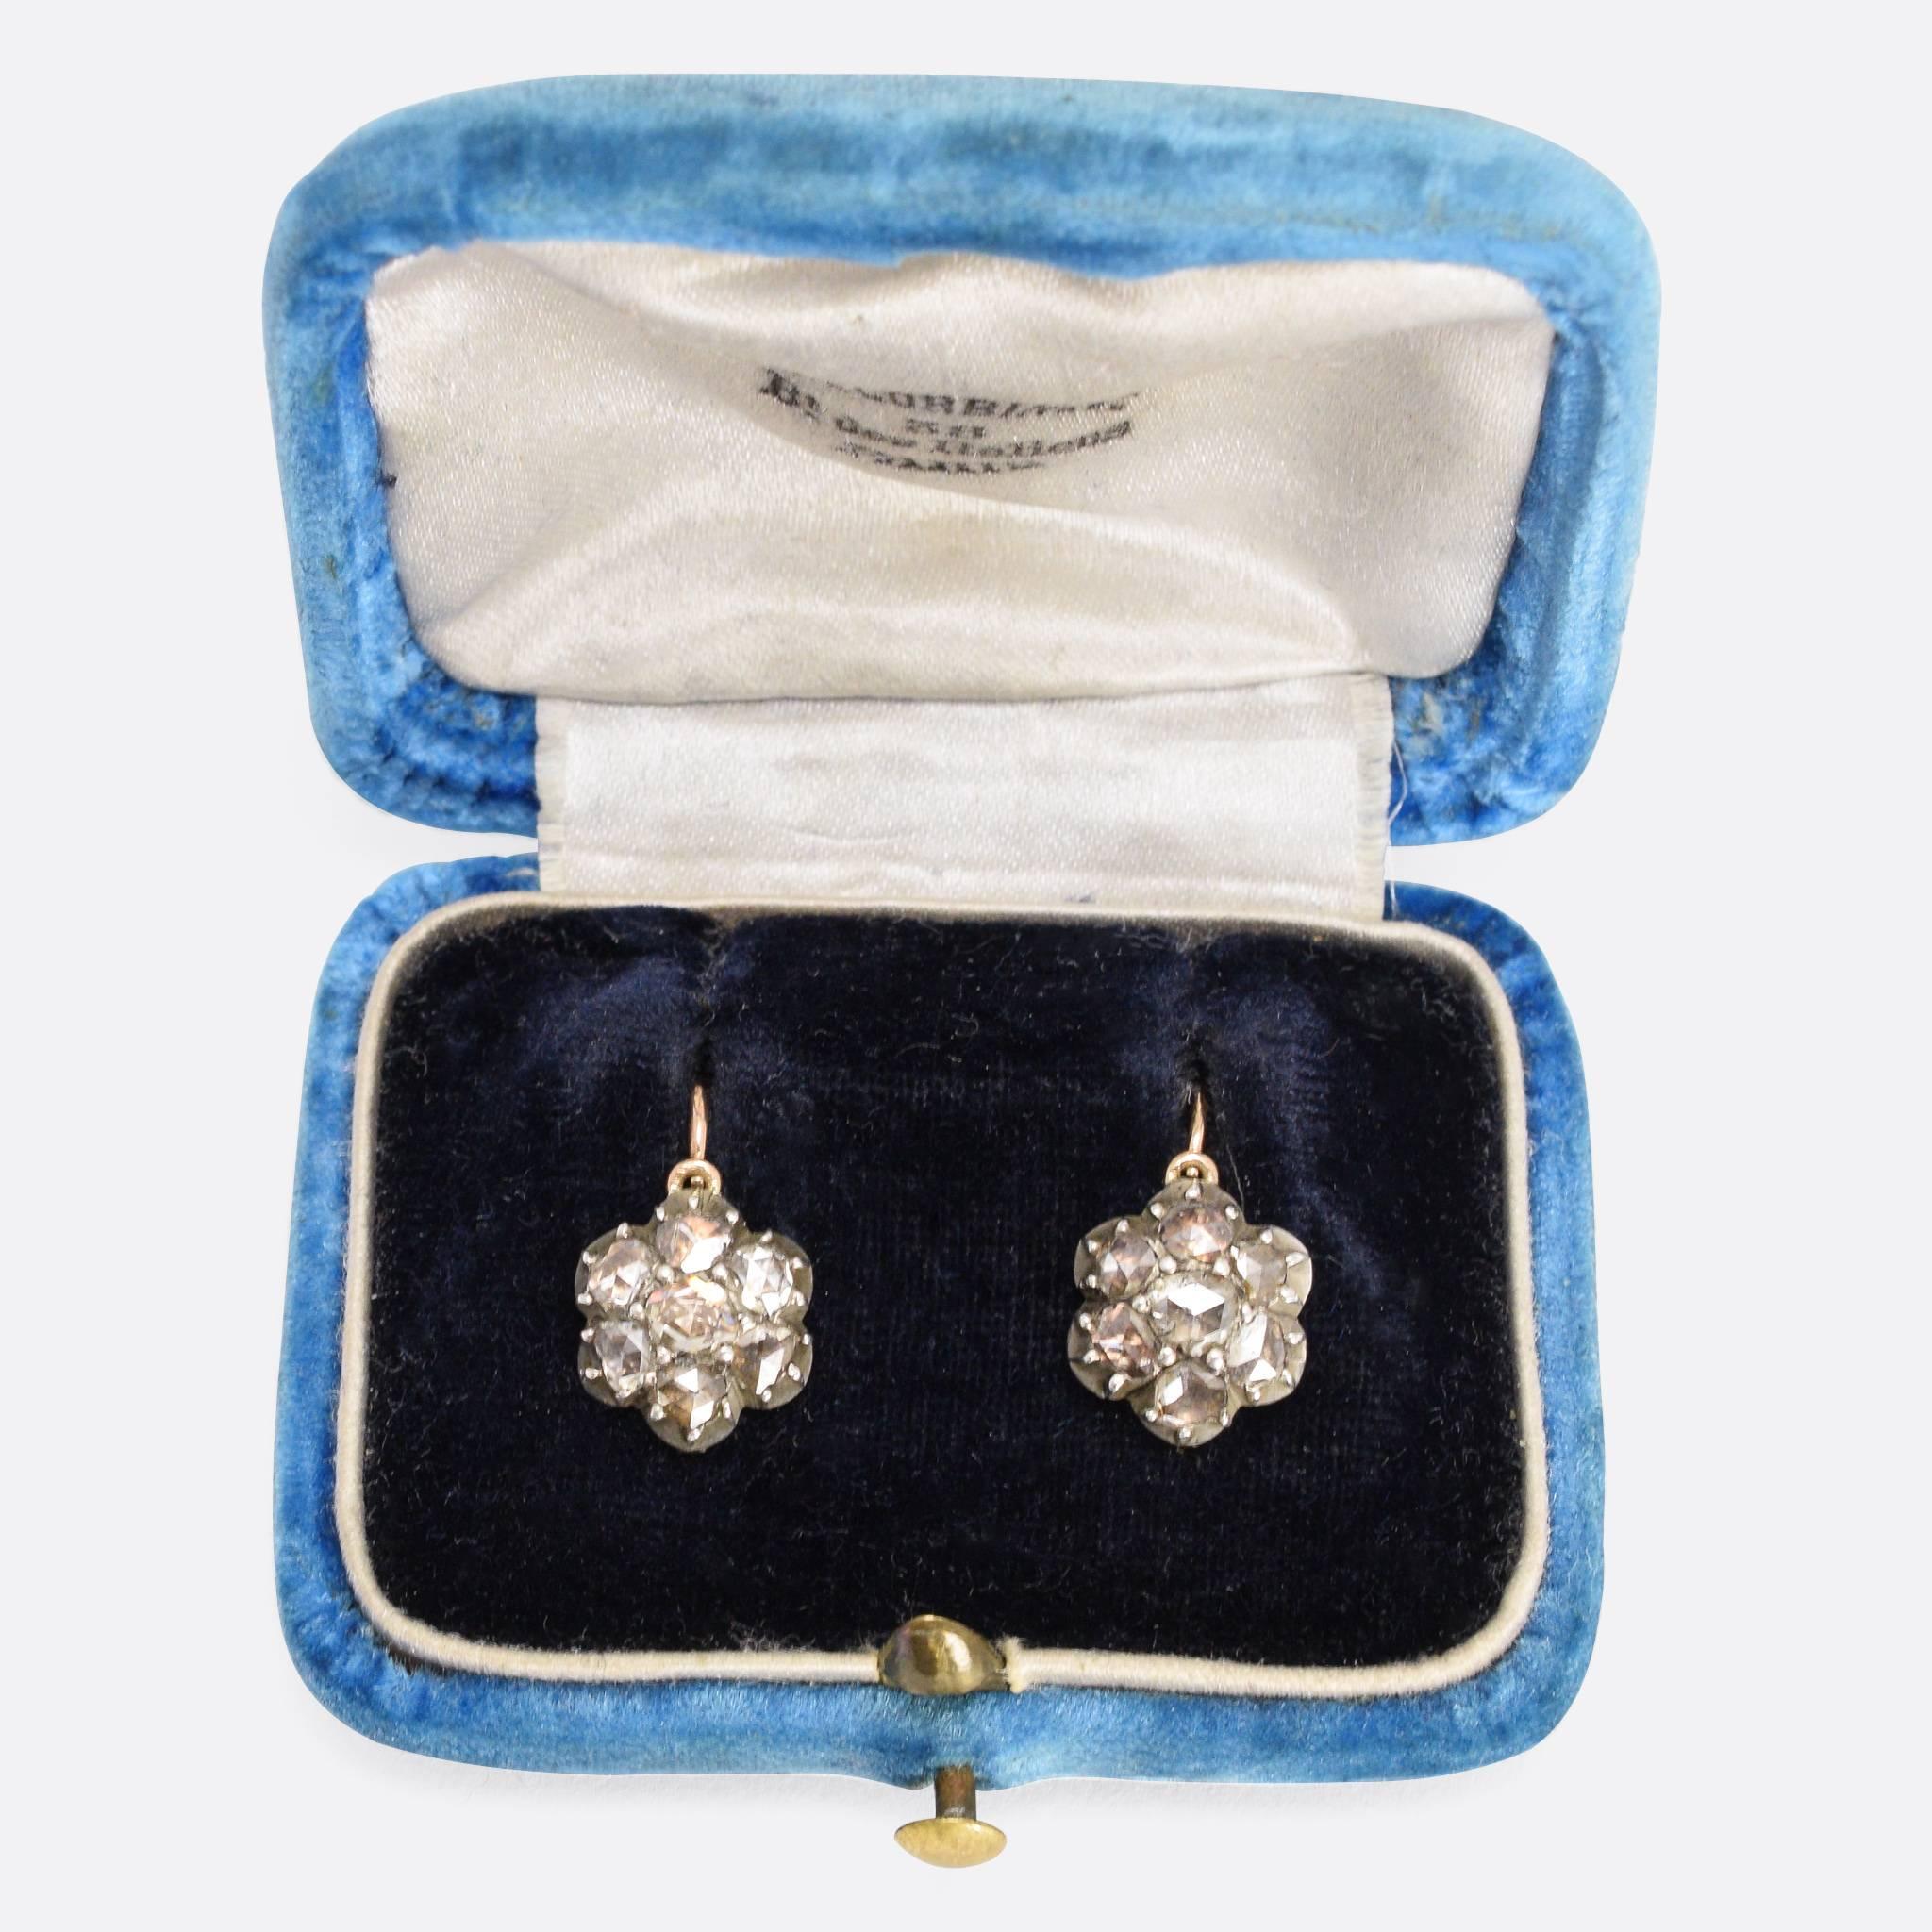 These adorable antique cluster earrings are set with foil-backed rose cut diamonds, arranged in flower formation. The heads are a good size, measuring  10mm across, and the stones set in silver as was typical at this time. It is likely that the 18k